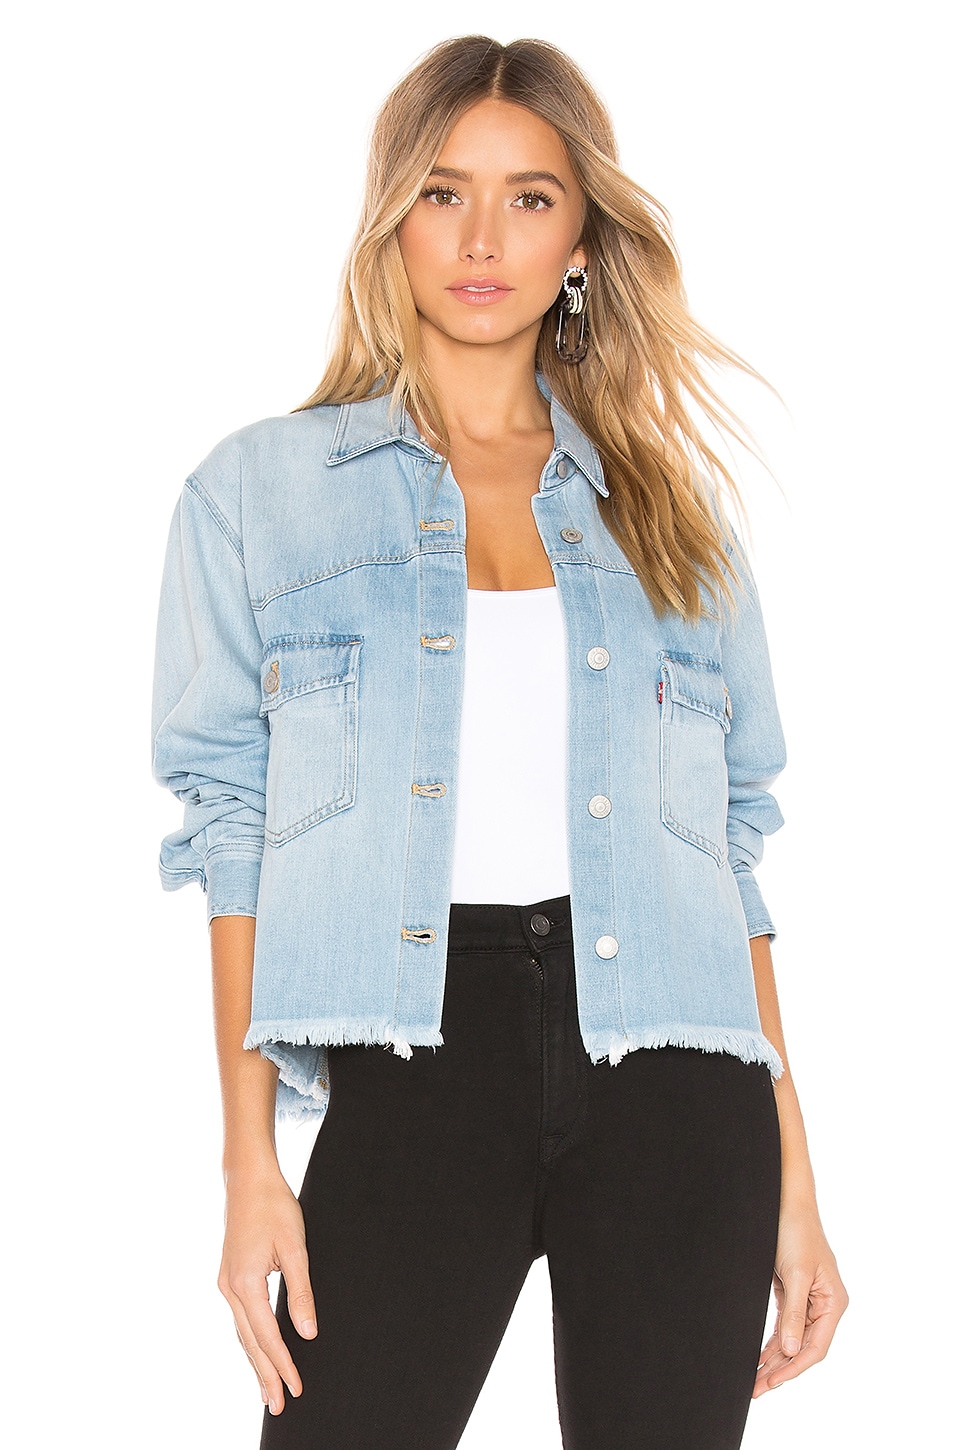 LEVI'S Addison Shirt in Your Best Shot | REVOLVE